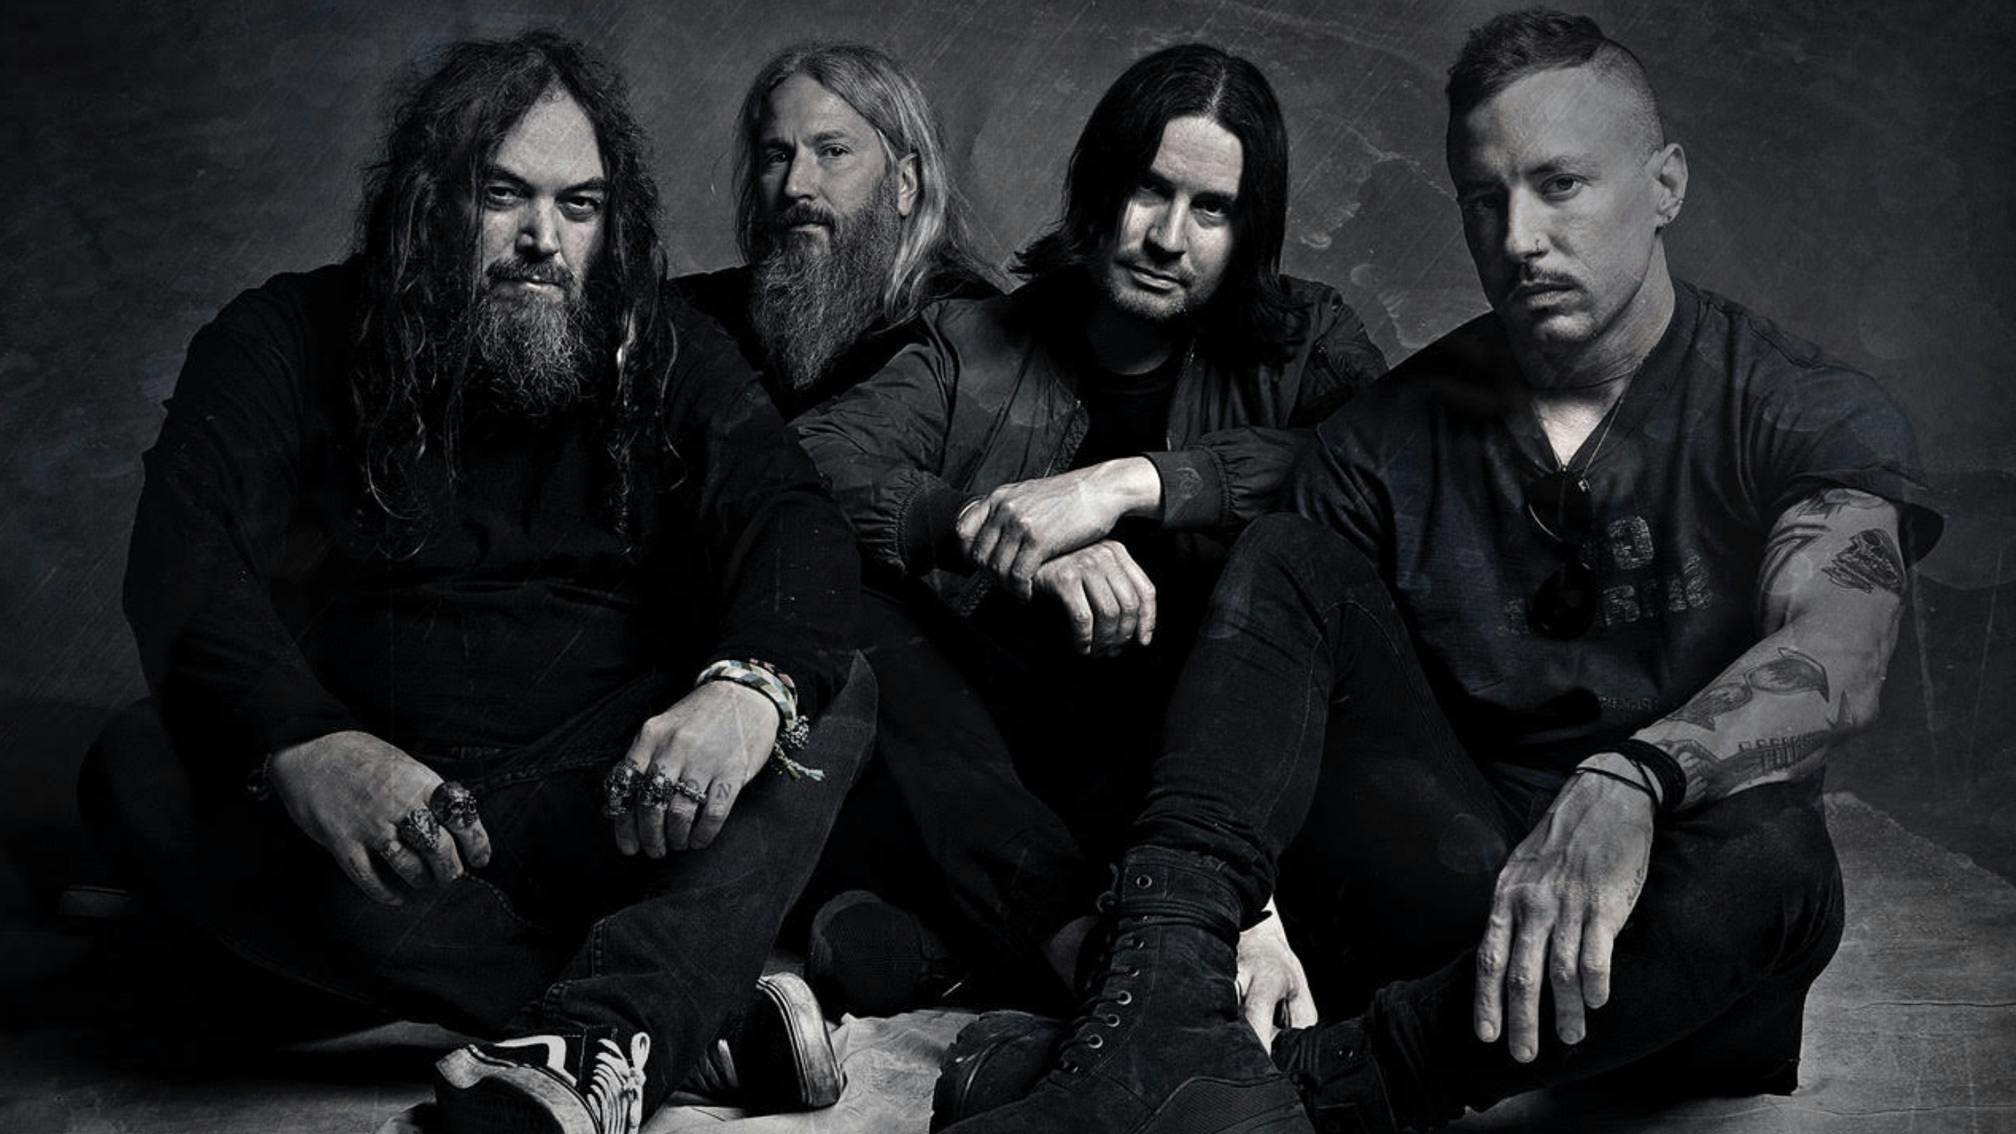 "This Was Just Too Damned Good To Let Go After One Album": Troy Sanders On The Return Of Killer Be Killed